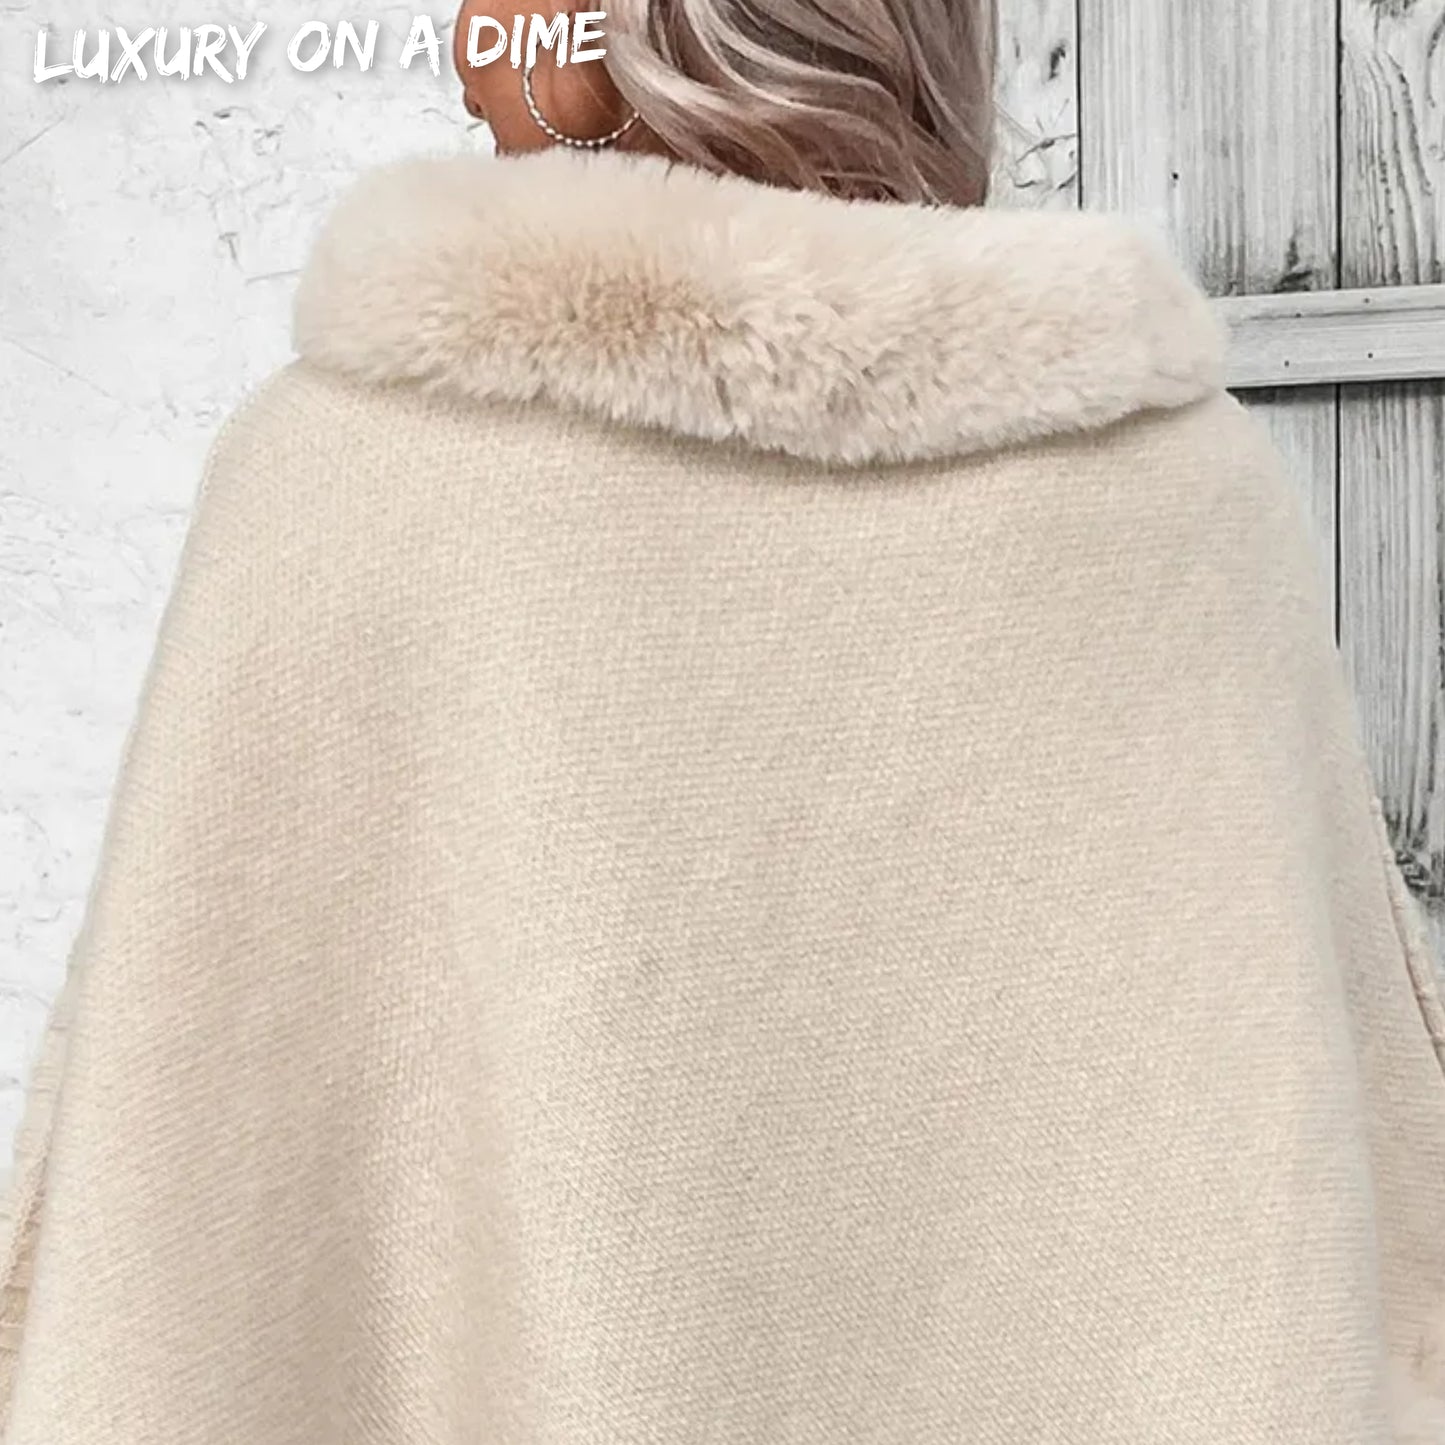 Soft Plush Faux Fur Woven Knit Oversized Pullover Sweater Jacket Poncho